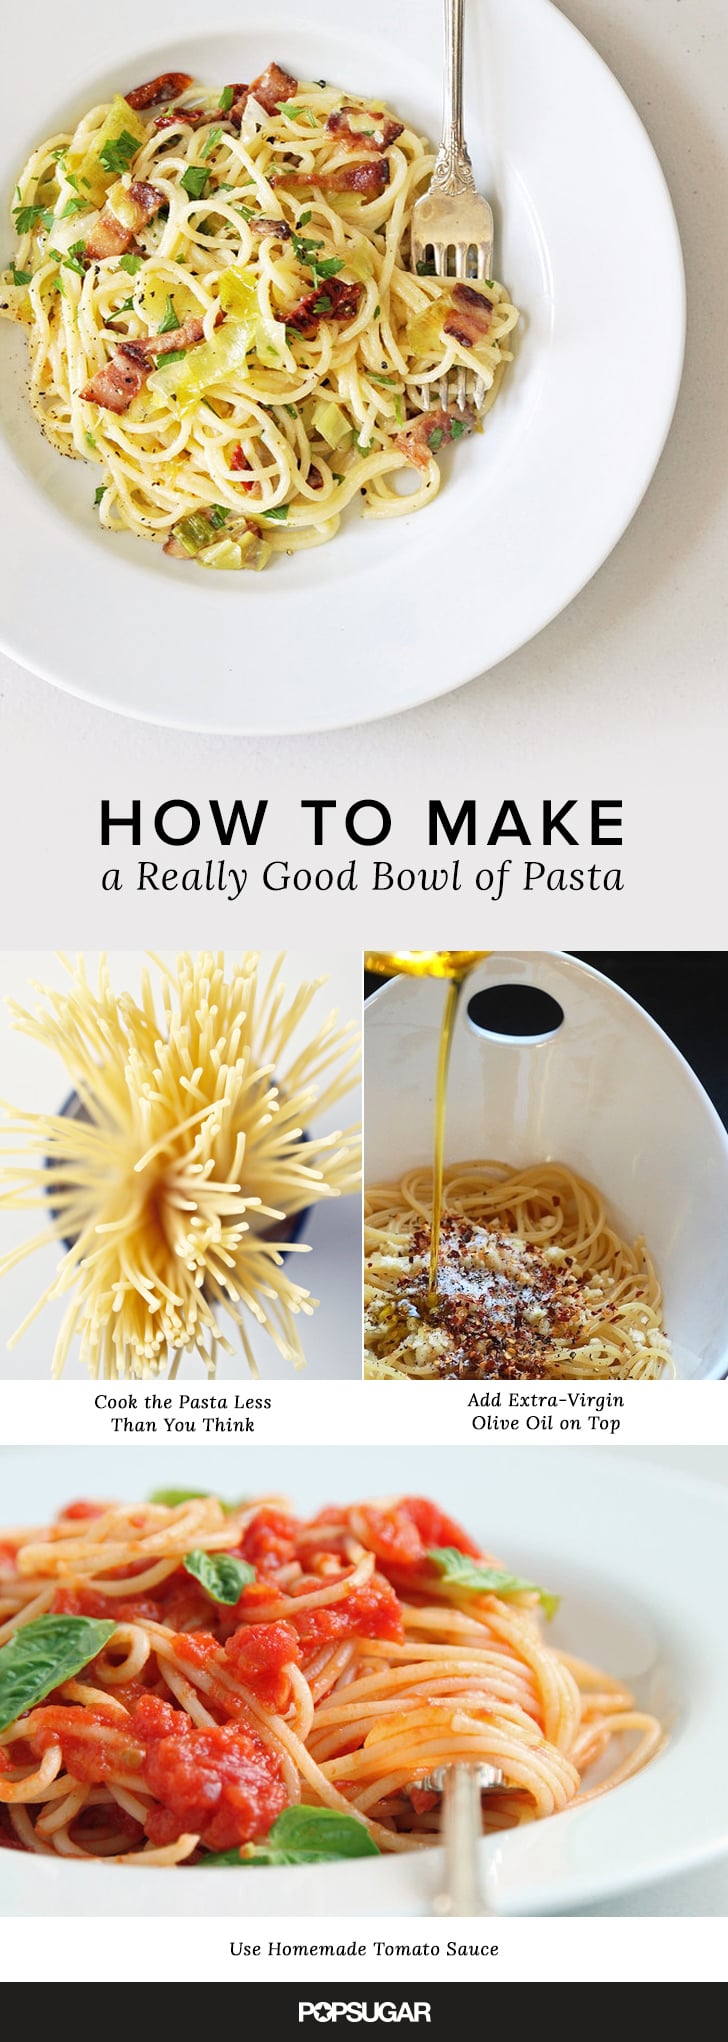 How to Make Really Good Pasta